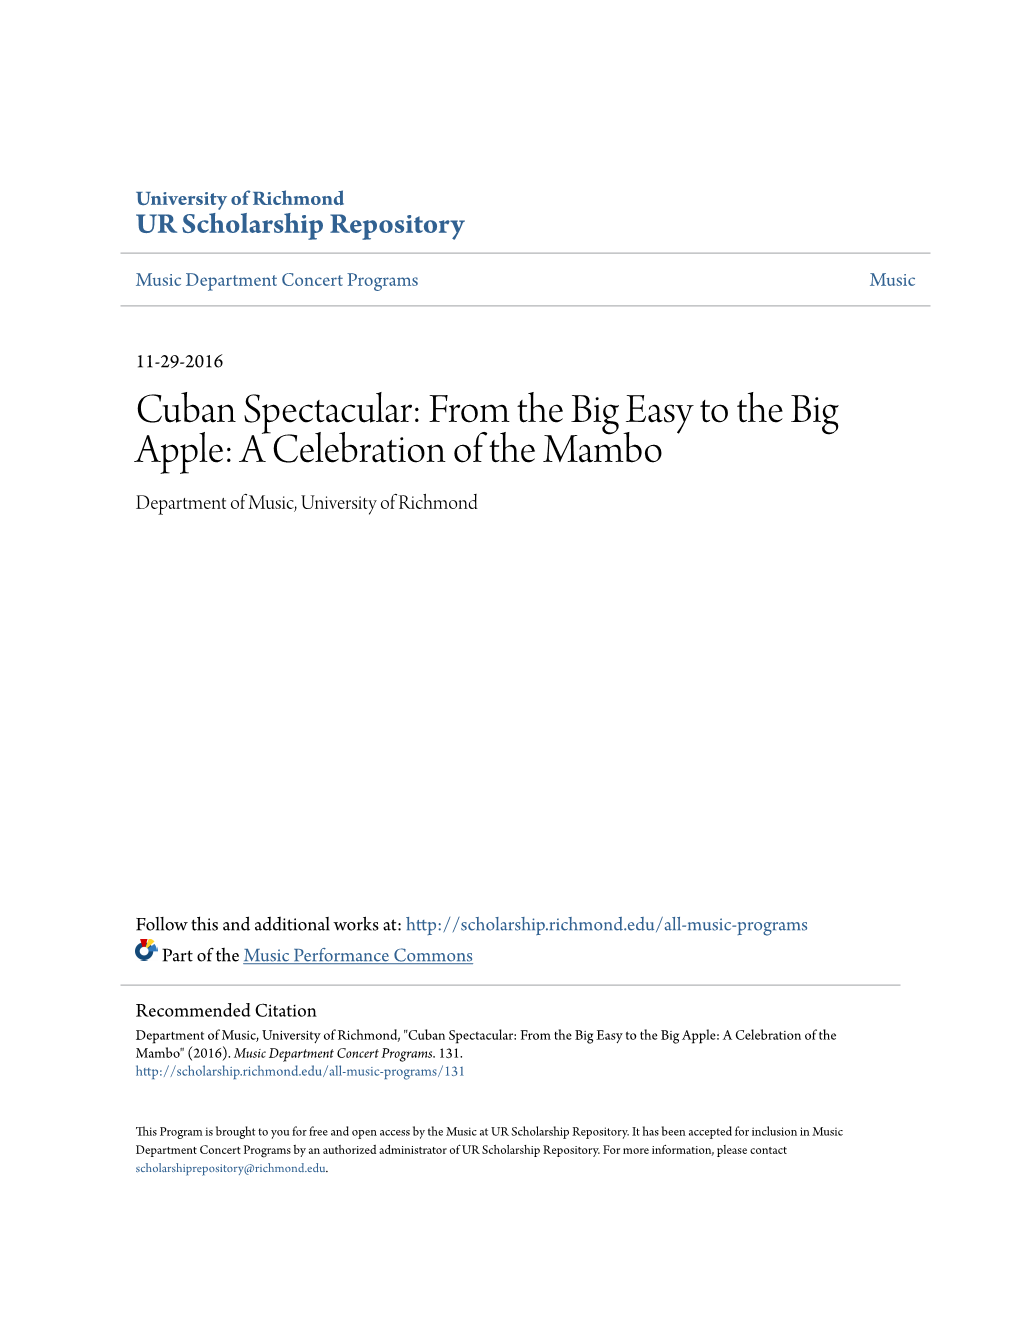 Cuban Spectacular: from the Big Easy to the Big Apple: a Celebration of the Mambo Department of Music, University of Richmond